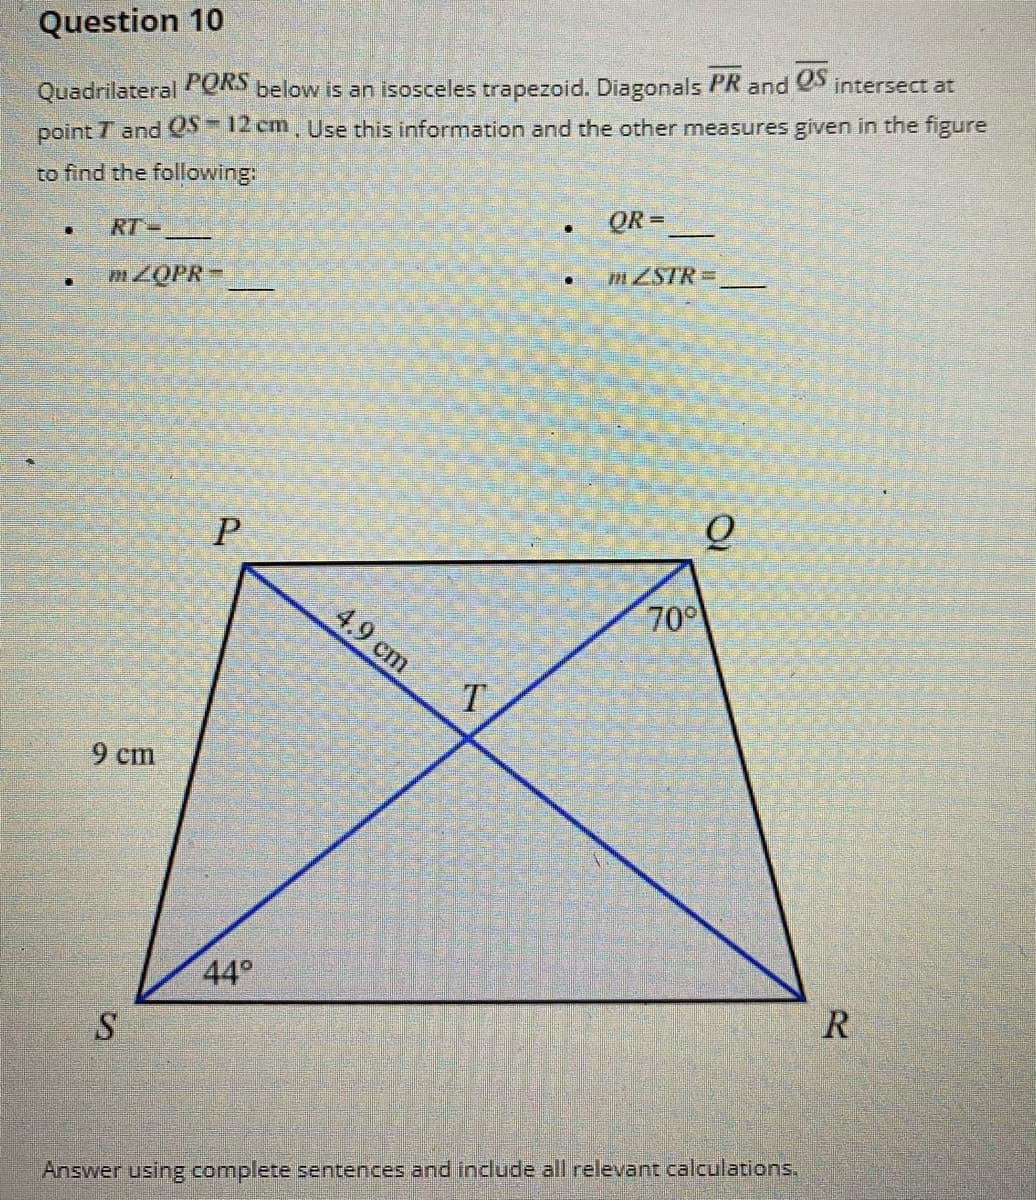 Question 10
Quadrilateral PORS below is an isosceles trapezoid. Diagonals PR and S intersect at
point T and QS=12 cm, Use this information and the other measures given in the figure
to find the following:
QR =
RT-
mZSTRD
4.9 cm
70
T.
9 cm
44°
R
Answer using complete sentences and include all relevant calculations.
P.
